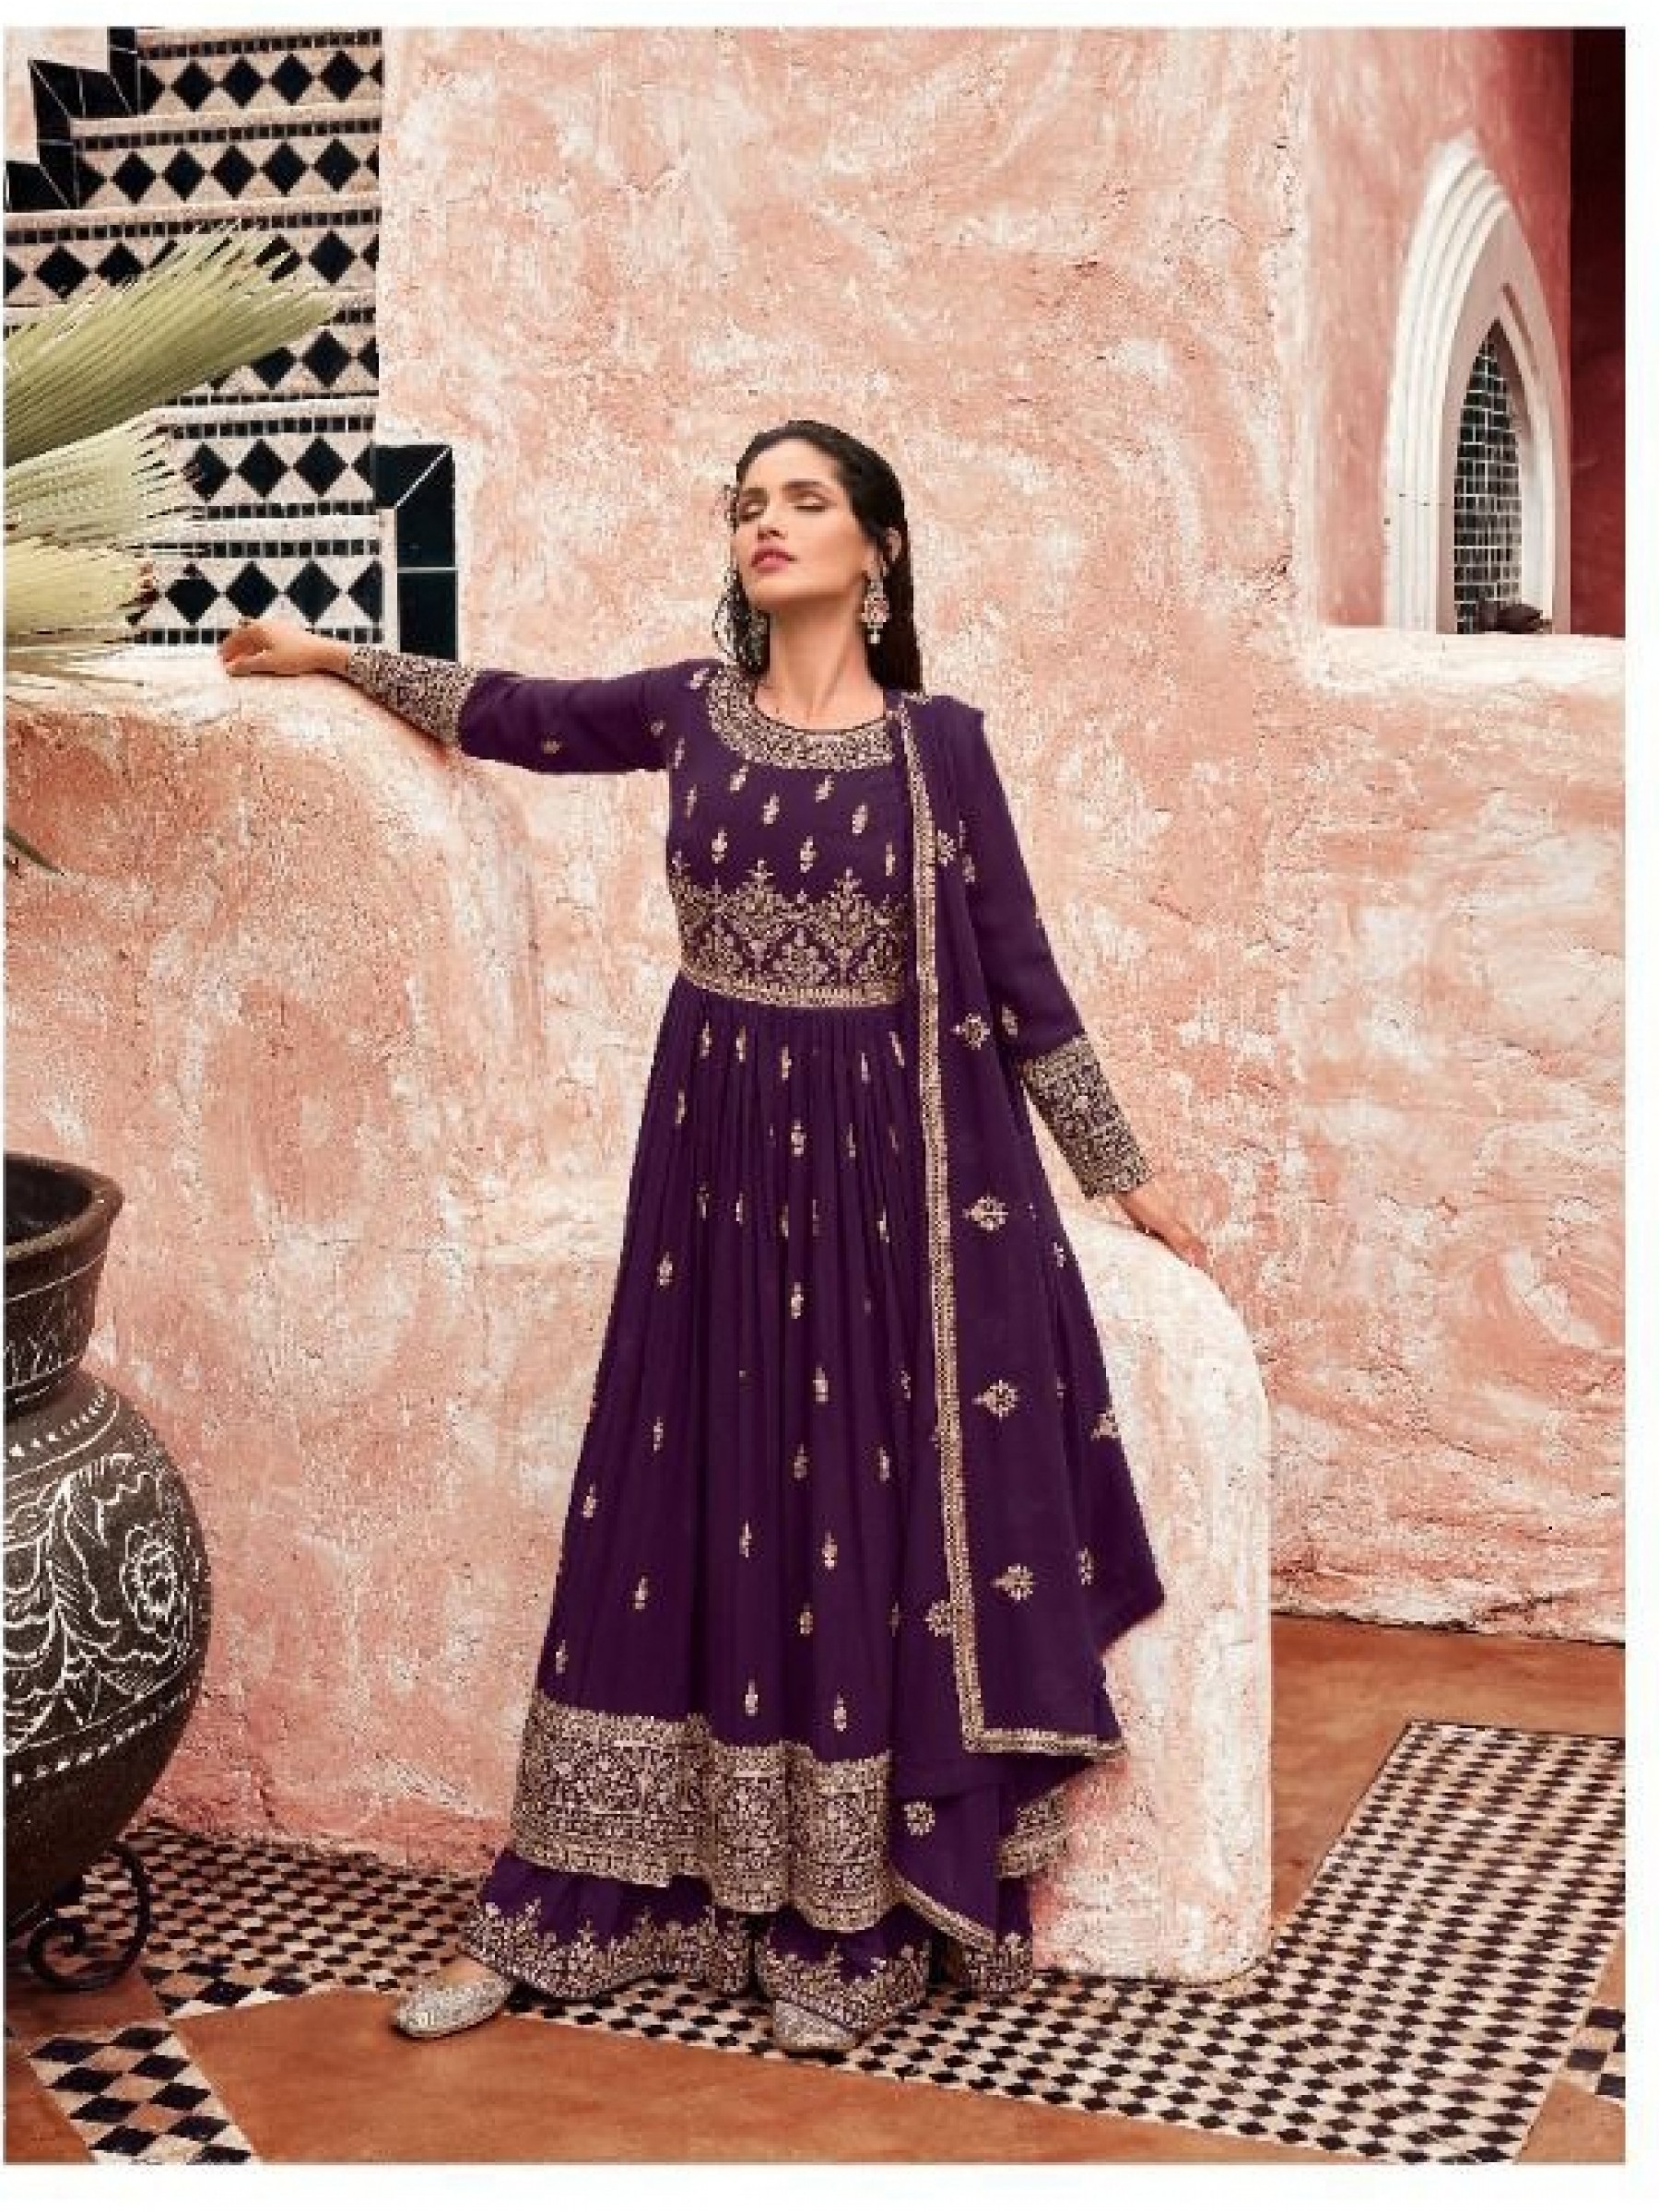 Plazo Dress - Buy Plazo Suits Online at India's Best Online Shopping Store.  Check Plazo kurti designs price in India and Buy Online